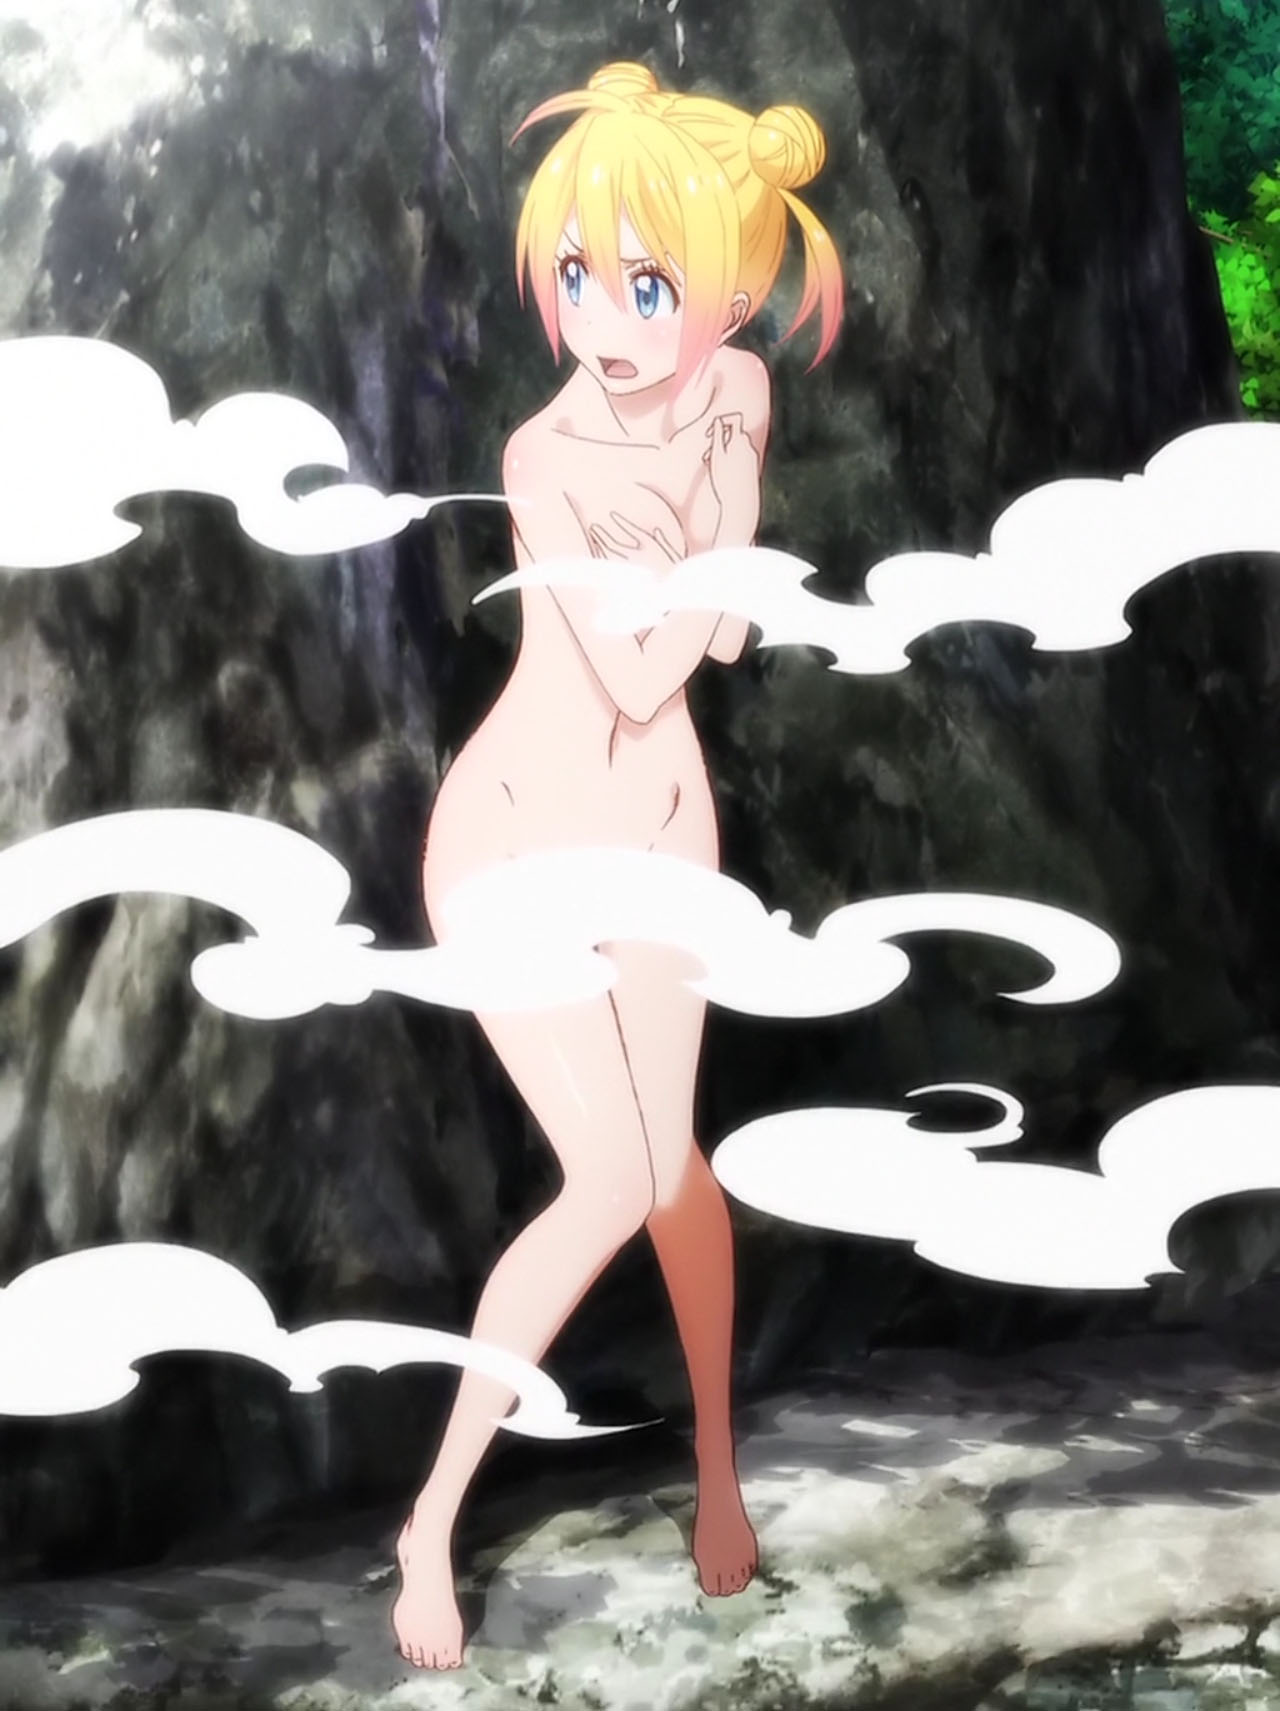 Nude nisekoi images.tinydeal.com: over